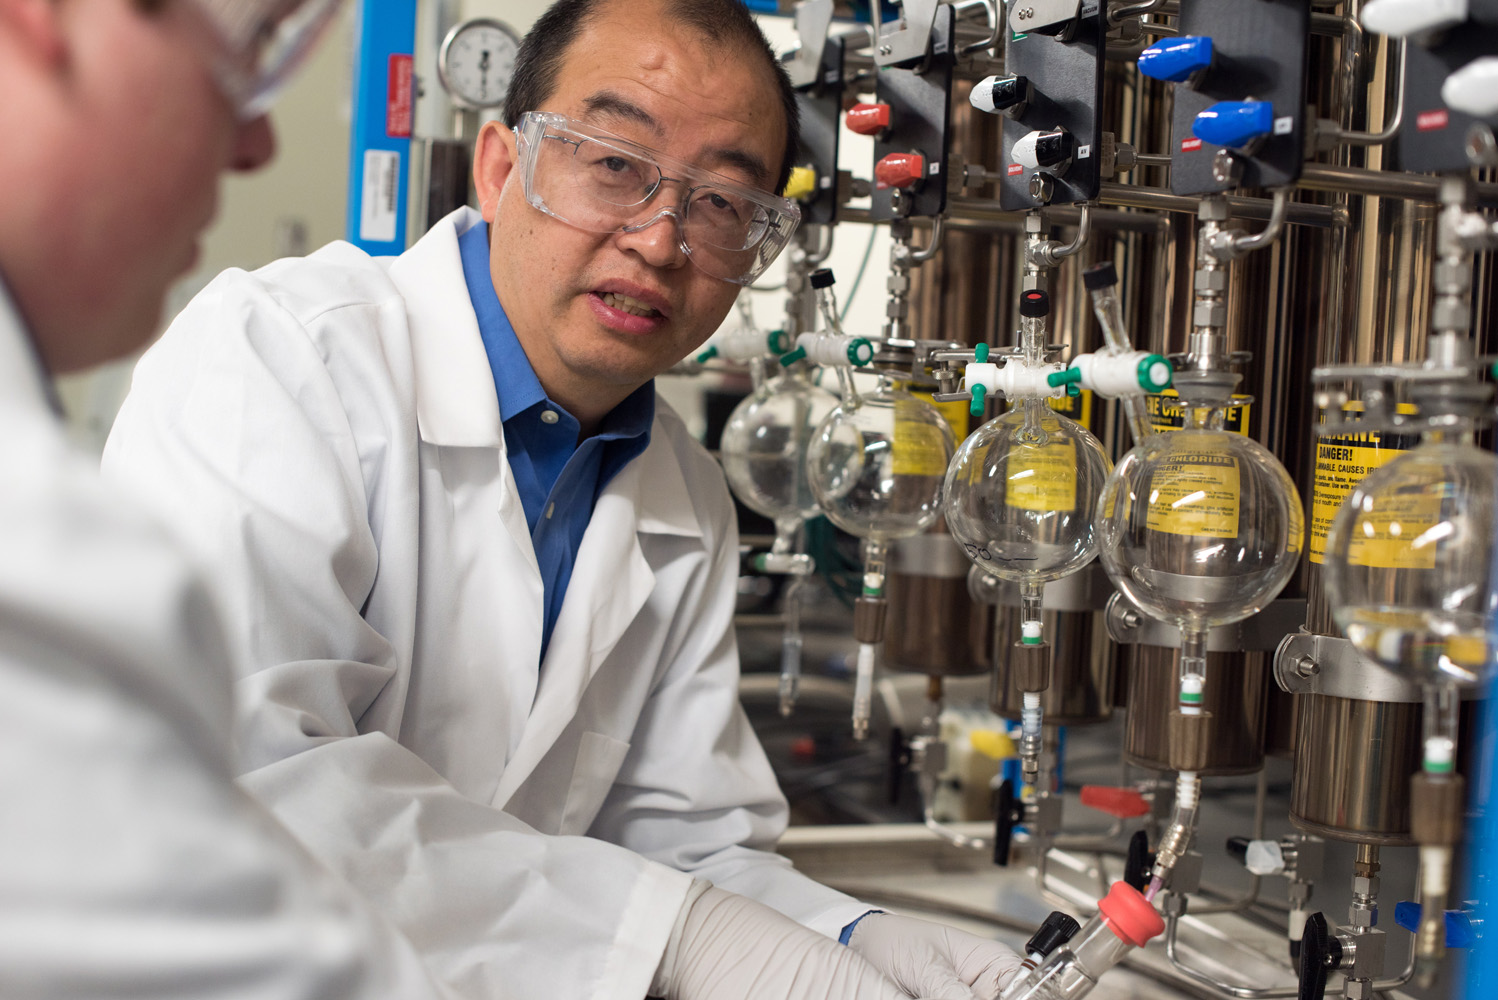 Texas A&M chemist Hongcai Joe Zhou instructs a student as he fills glassware in his lab